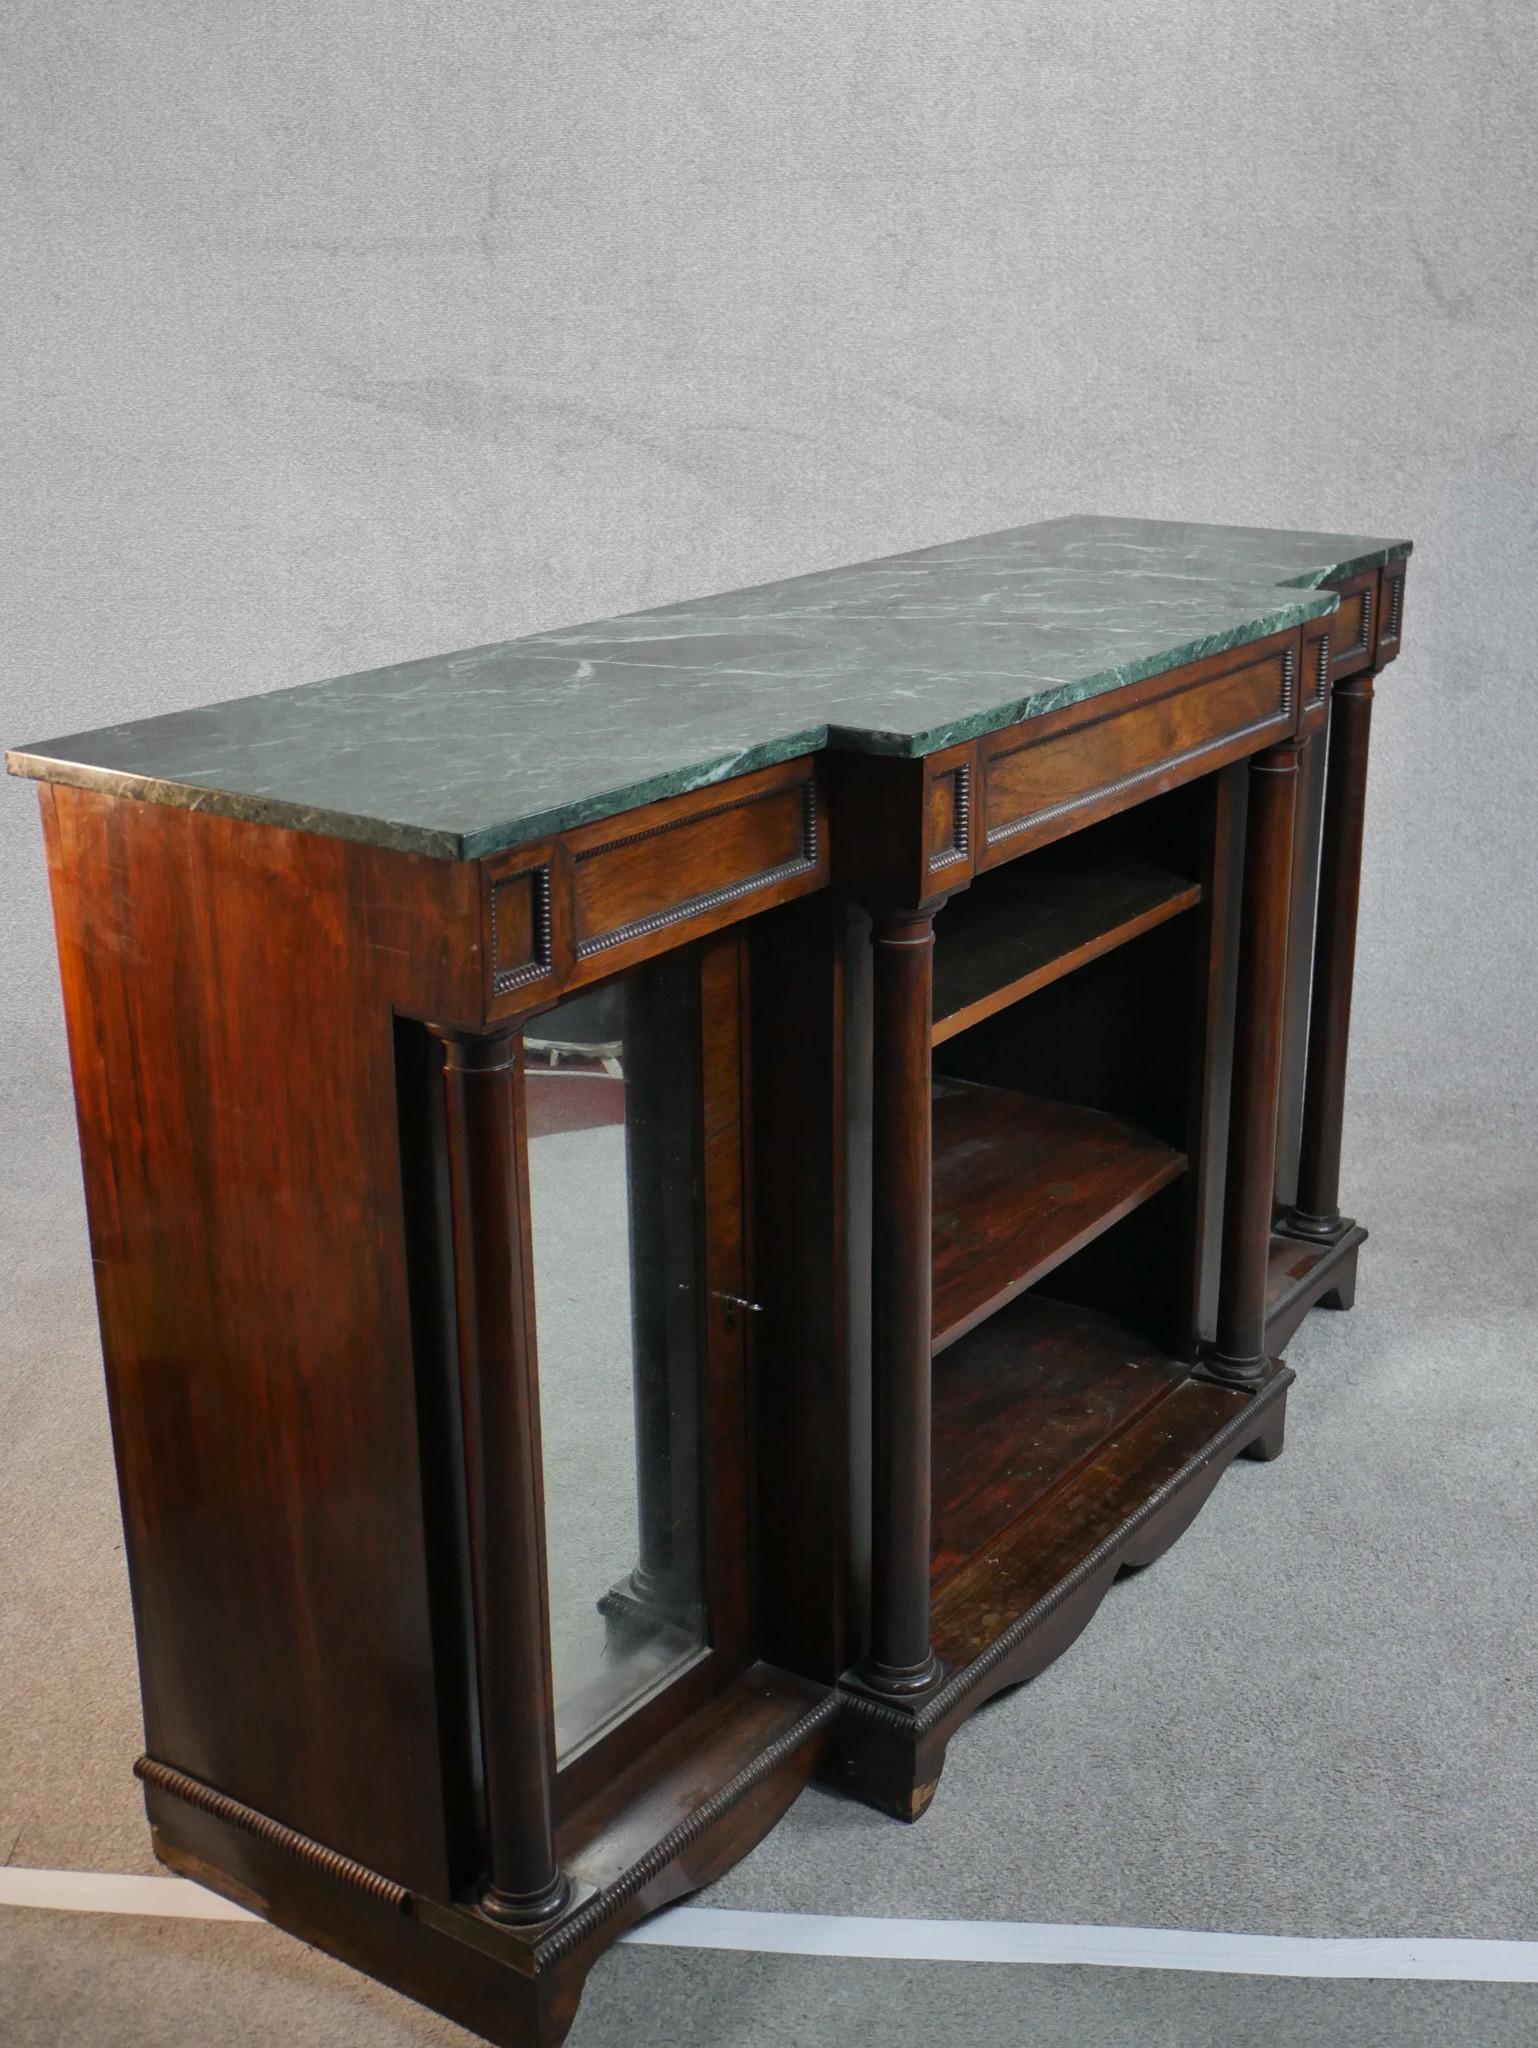 A William IV walnut breakfront sideboard, with a green marble top supported by four columns, with - Image 7 of 7